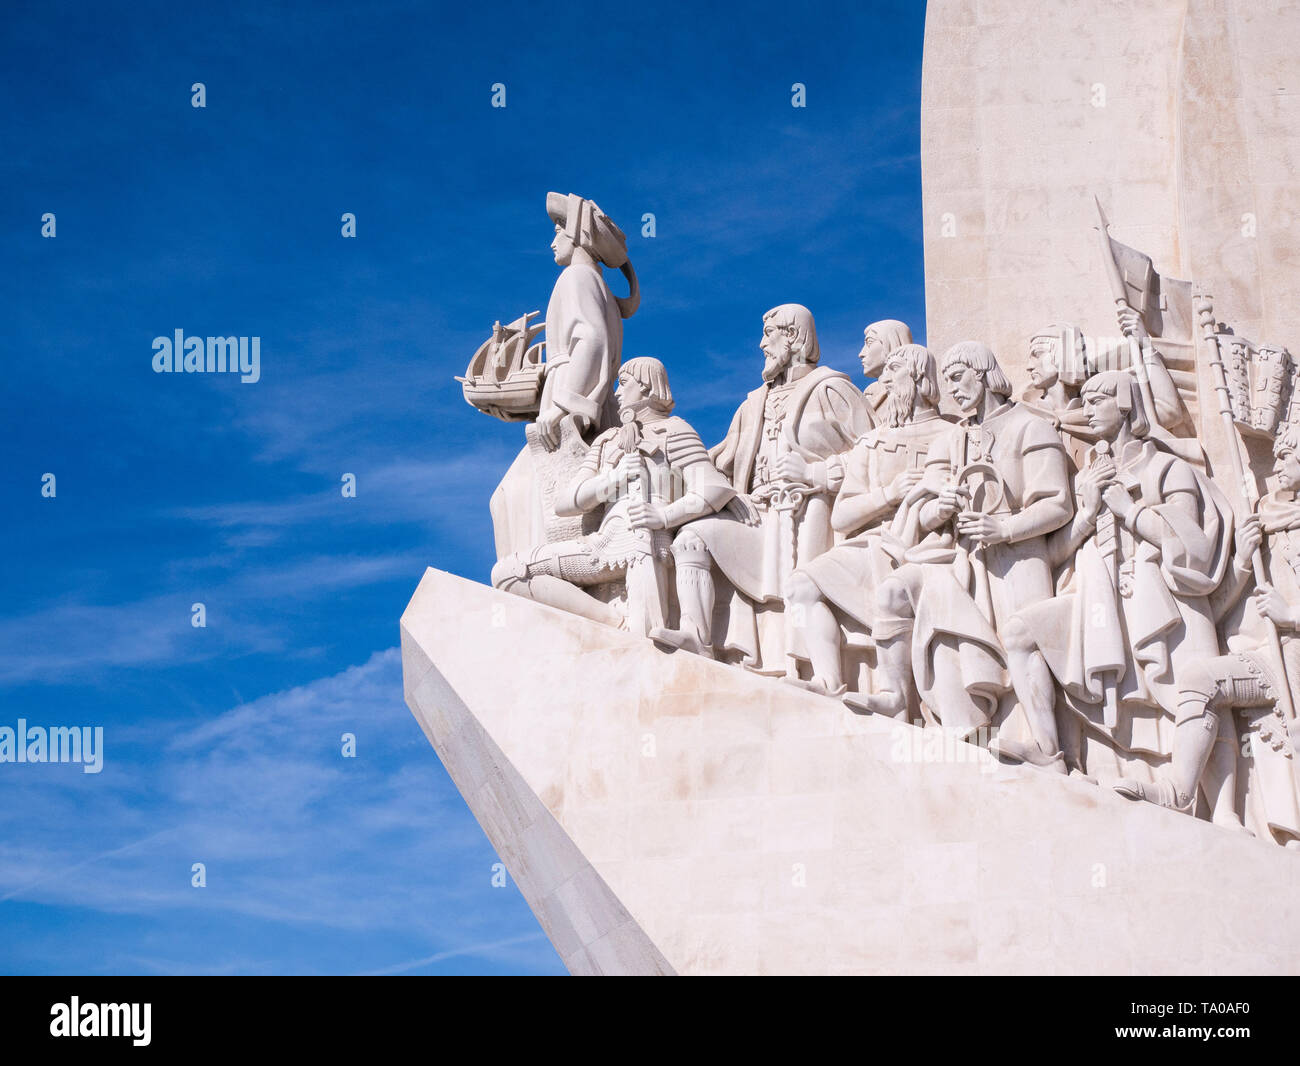 Monument to the Discoveries of the New World in Belem, Lisbon, Portugal. Stock Photo